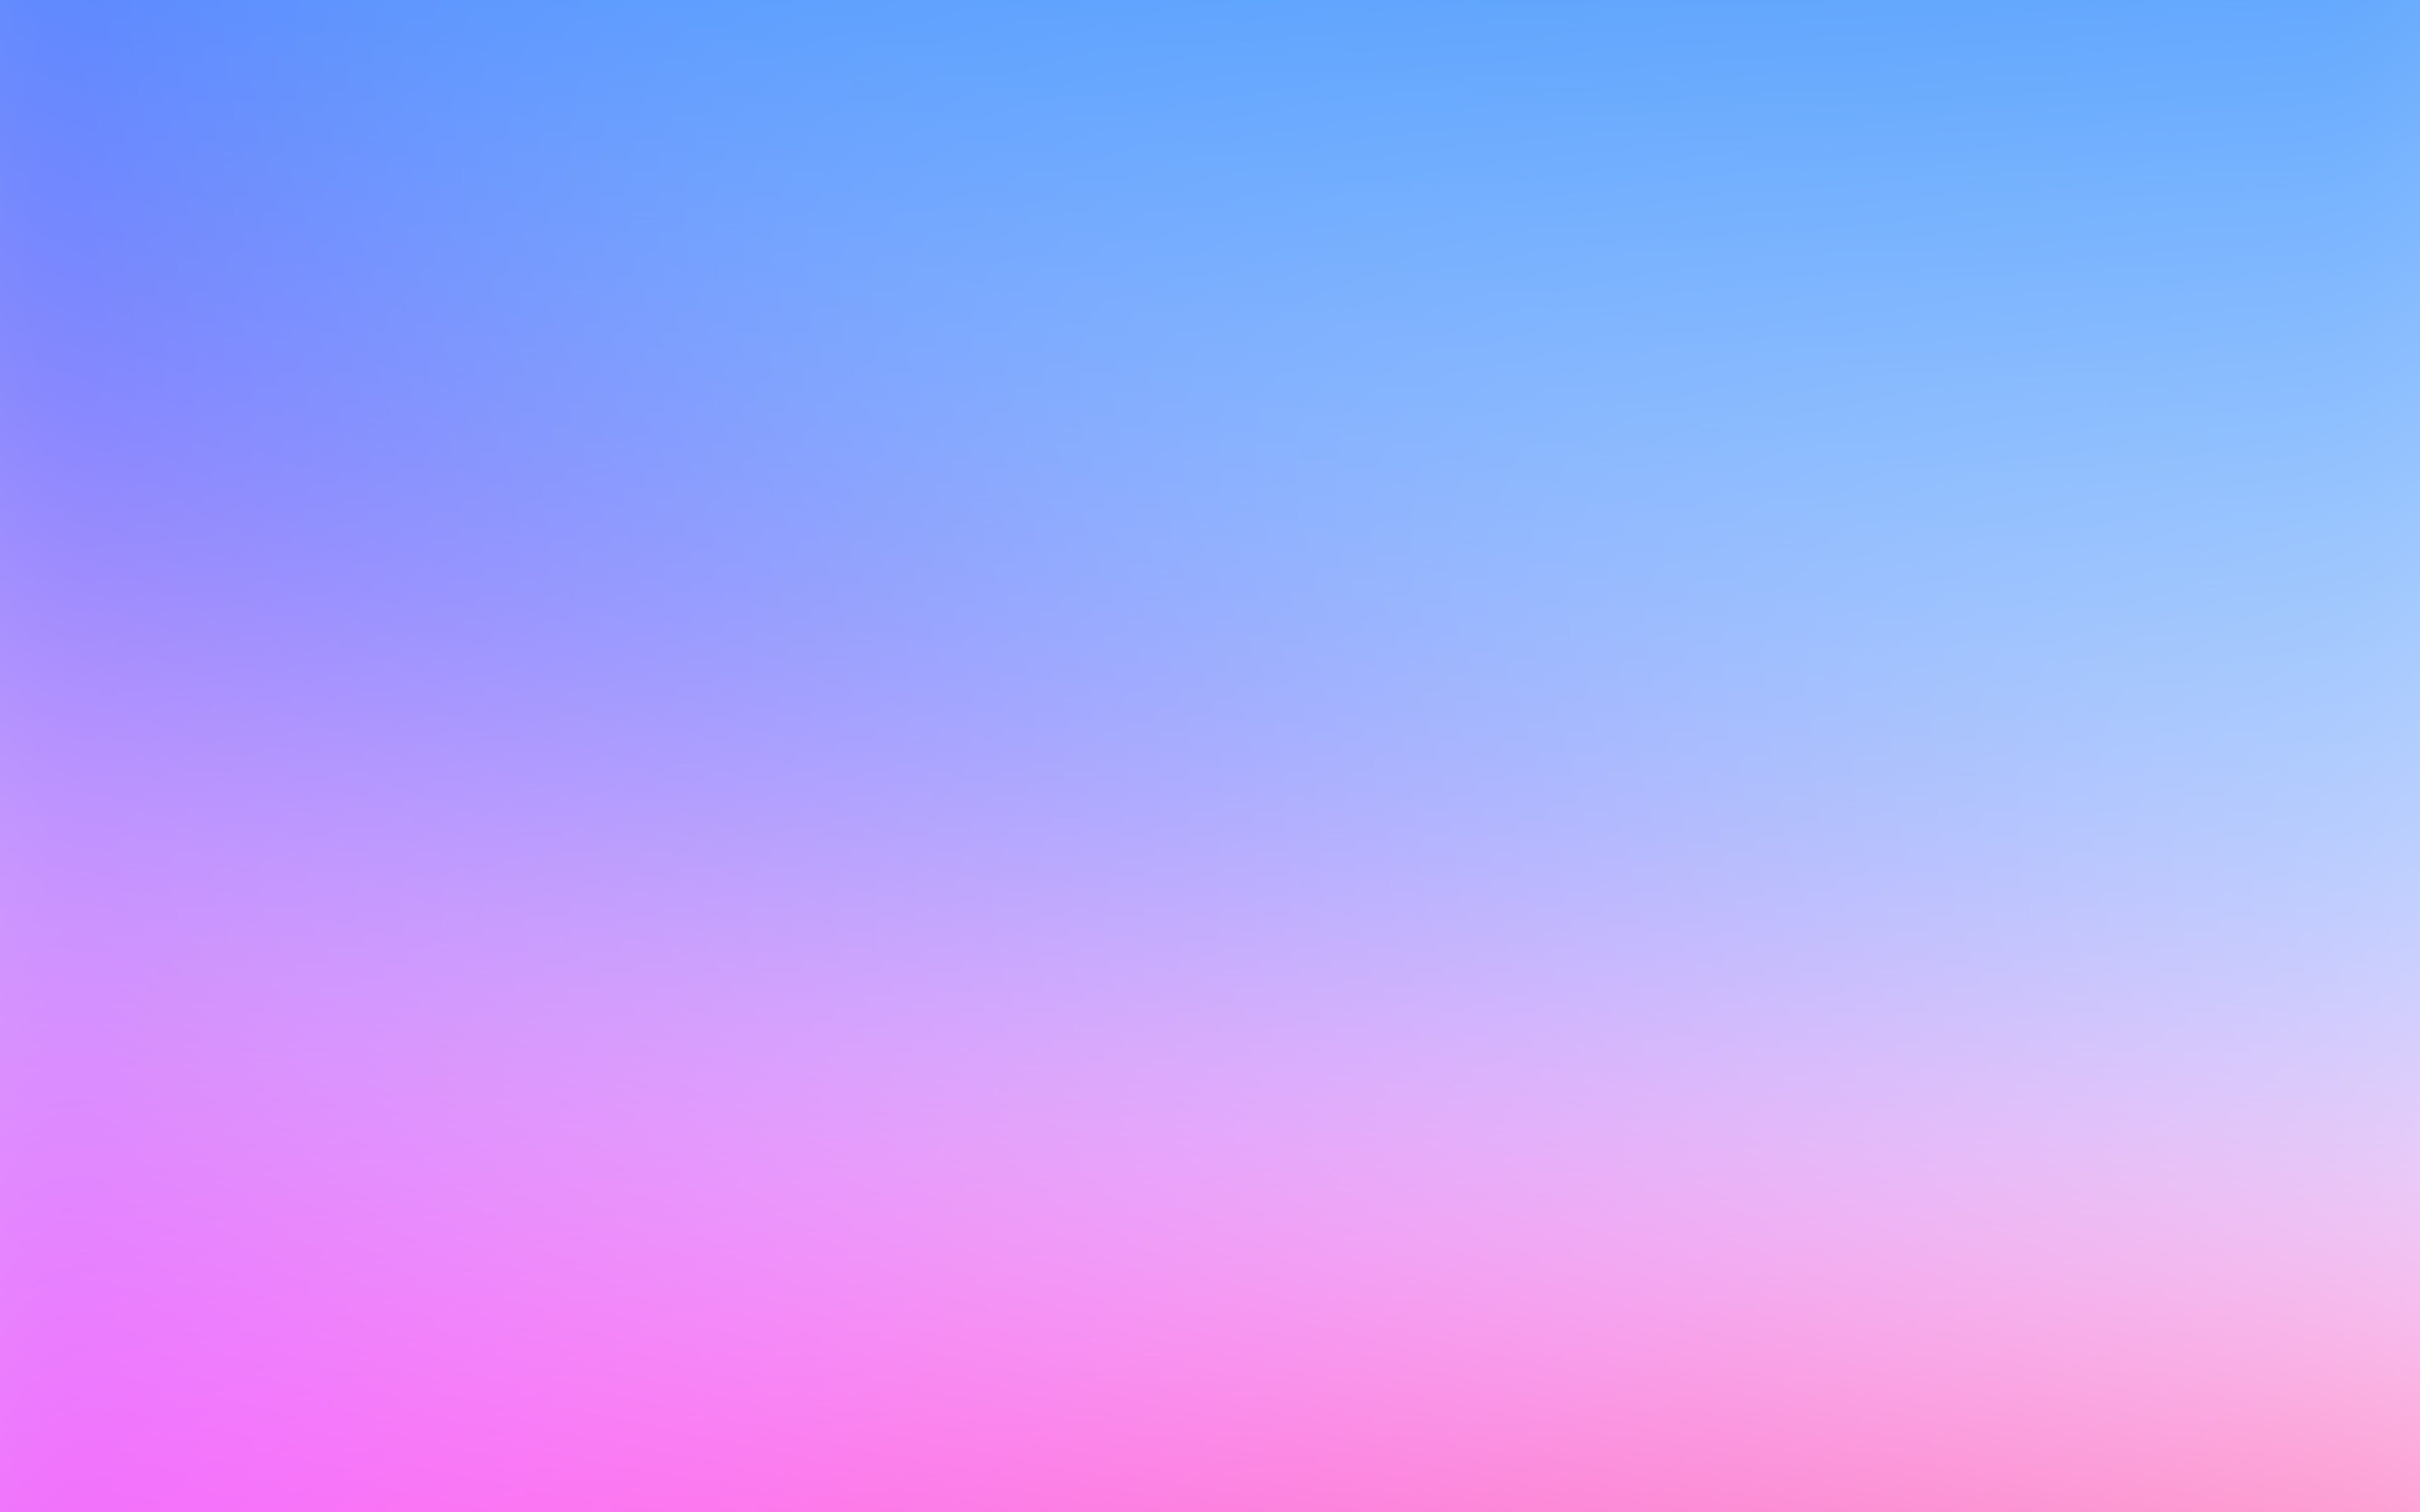 pink, blue, blur, gradation, backgrounds, sky, pink color, abstract